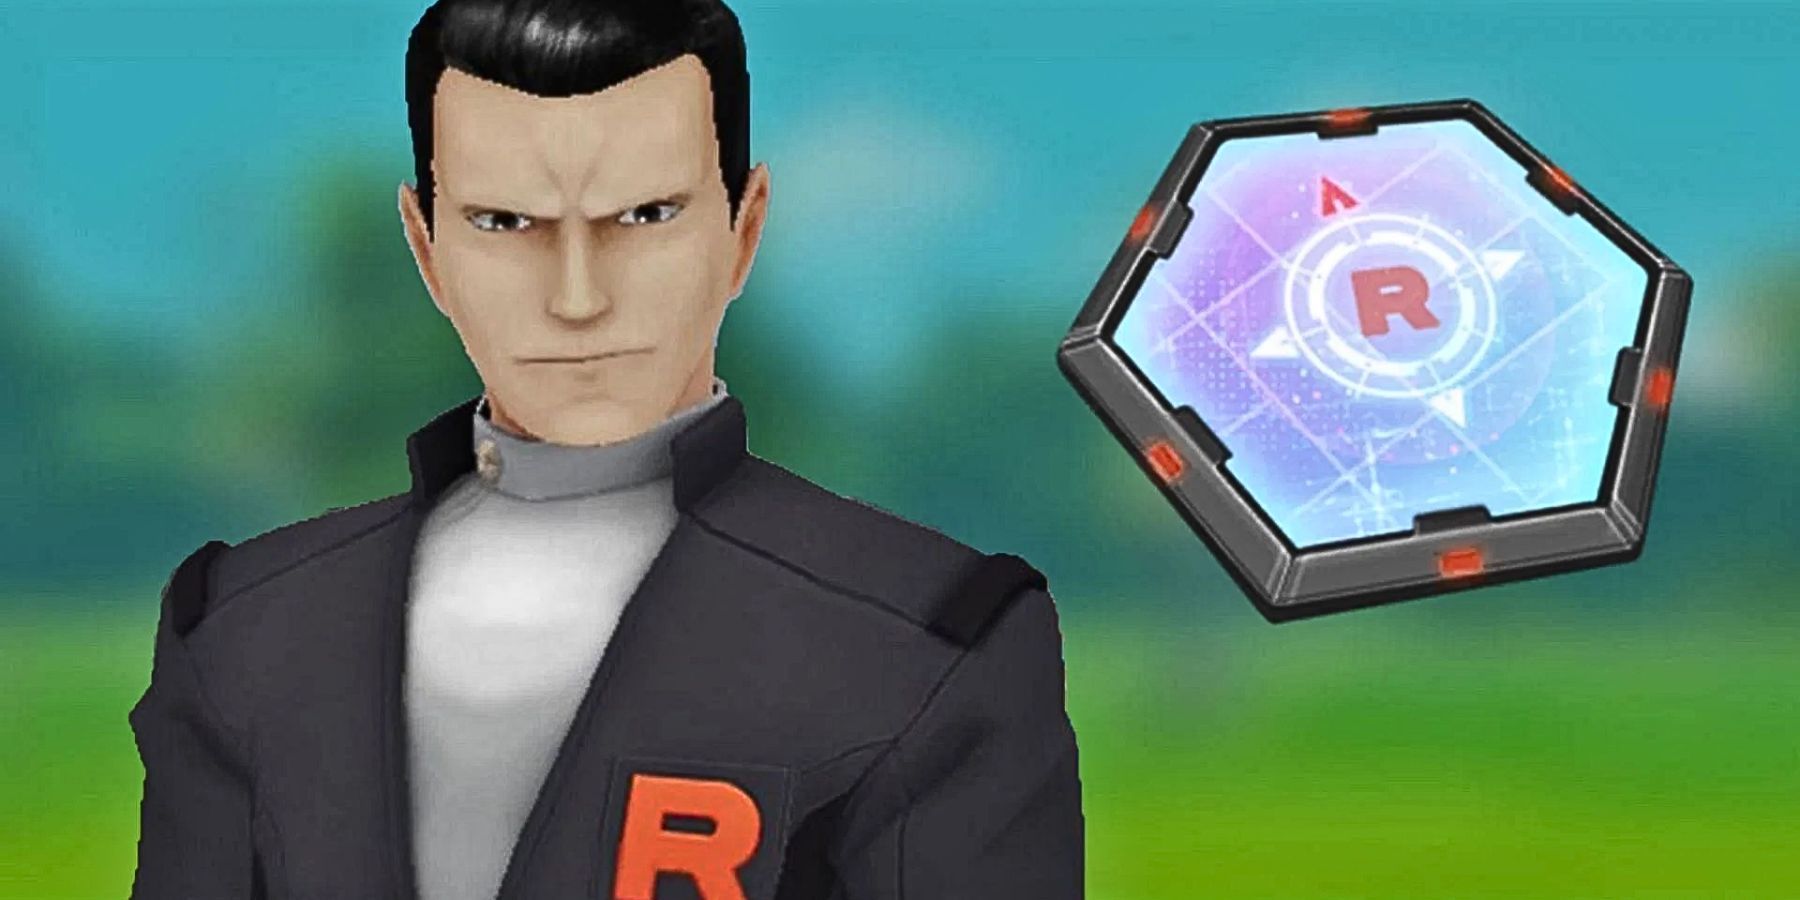 How to Defeat Leader Arlo Sierra Cliff and Giovanni Pokemon Go (February  2023) New Shadow Pokemon Best Counters